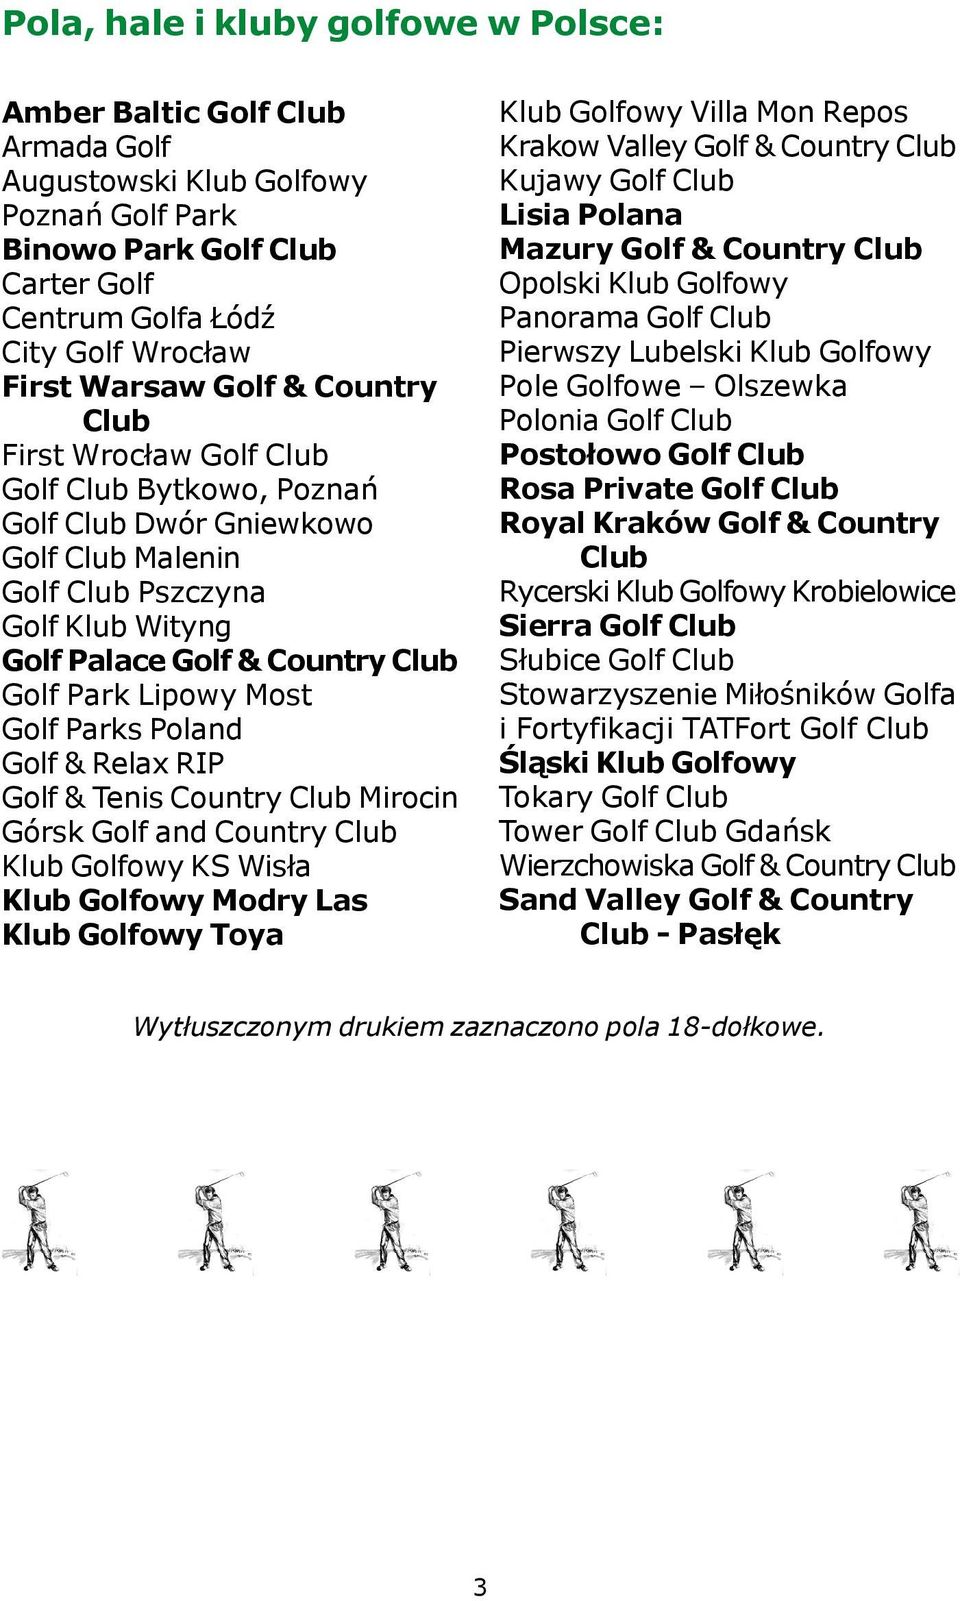 Most Golf Parks Poland Golf & Relax RIP Golf & Tenis Country Club Mirocin Górsk Golf and Country Club Klub Golfowy KS Wis³a Klub Golfowy Modry Las Klub Golfowy Toya Klub Golfowy Villa Mon Repos